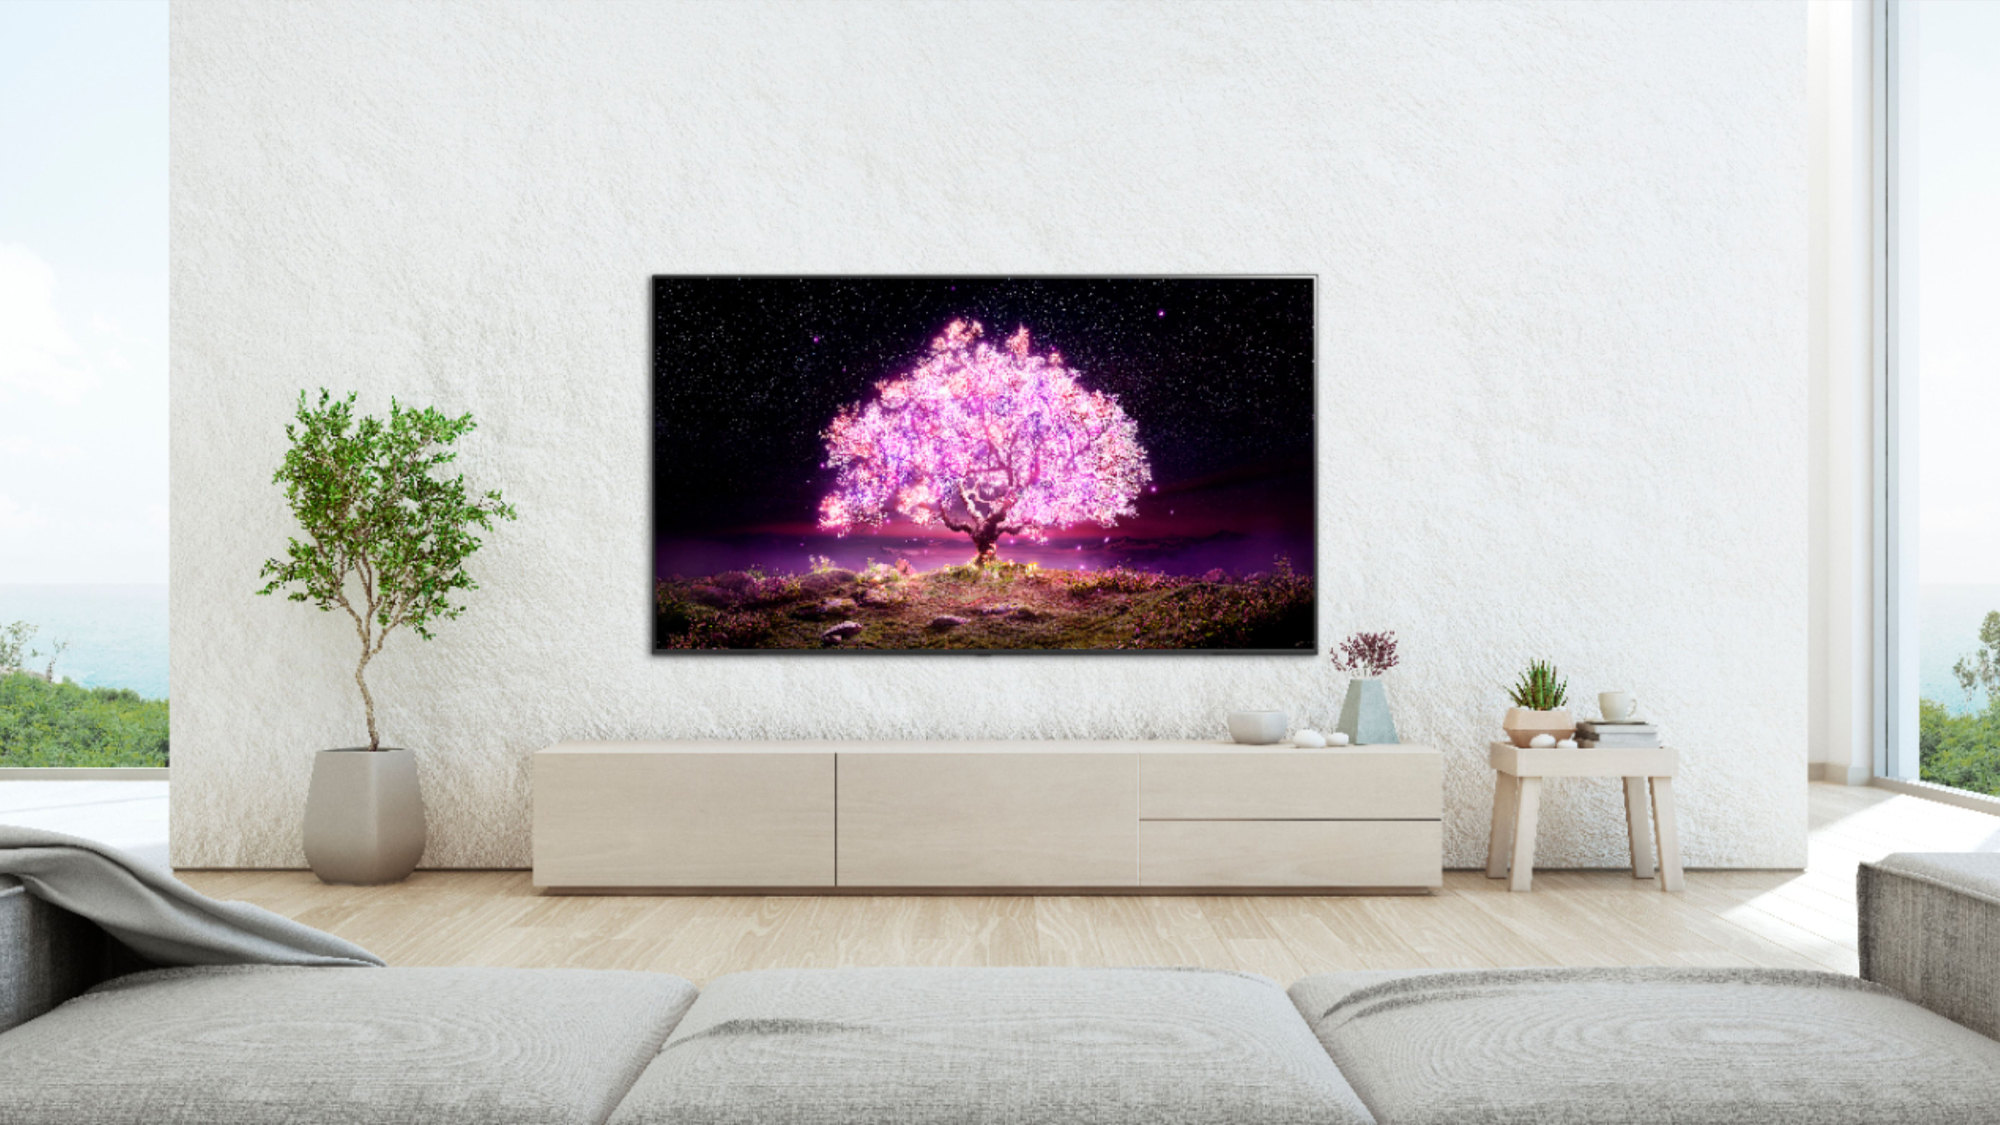 LG C1 OLED TV screen in the living room